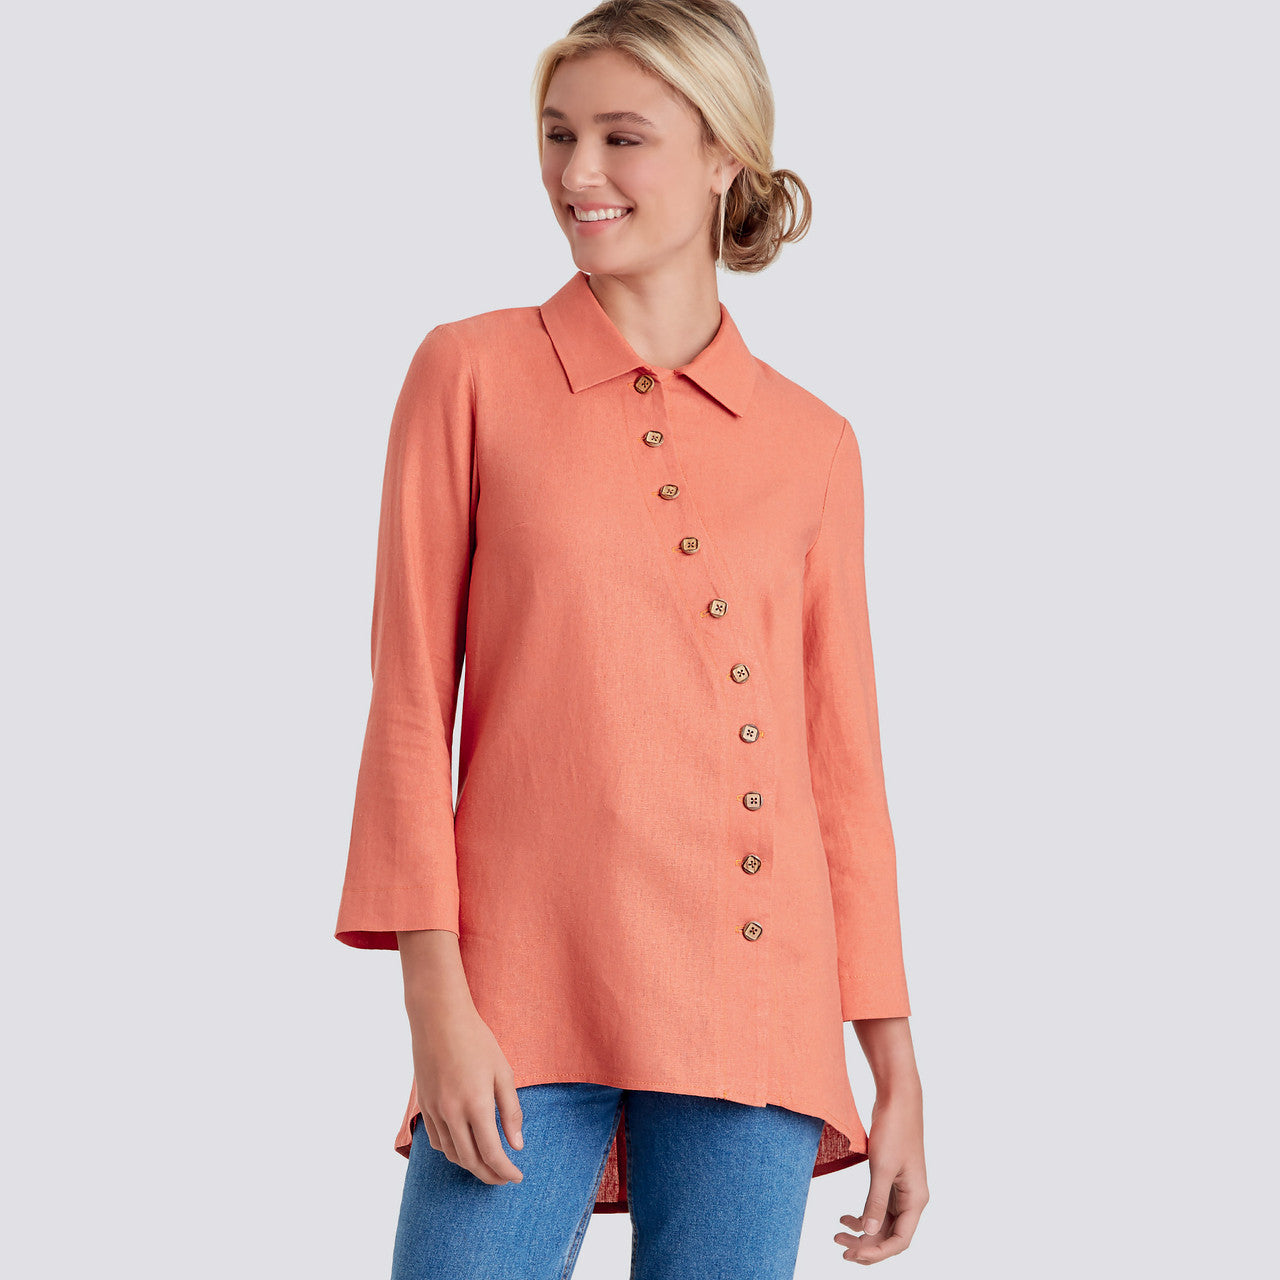 Misses' & Women's Button Front Shirt Sewing Pattern